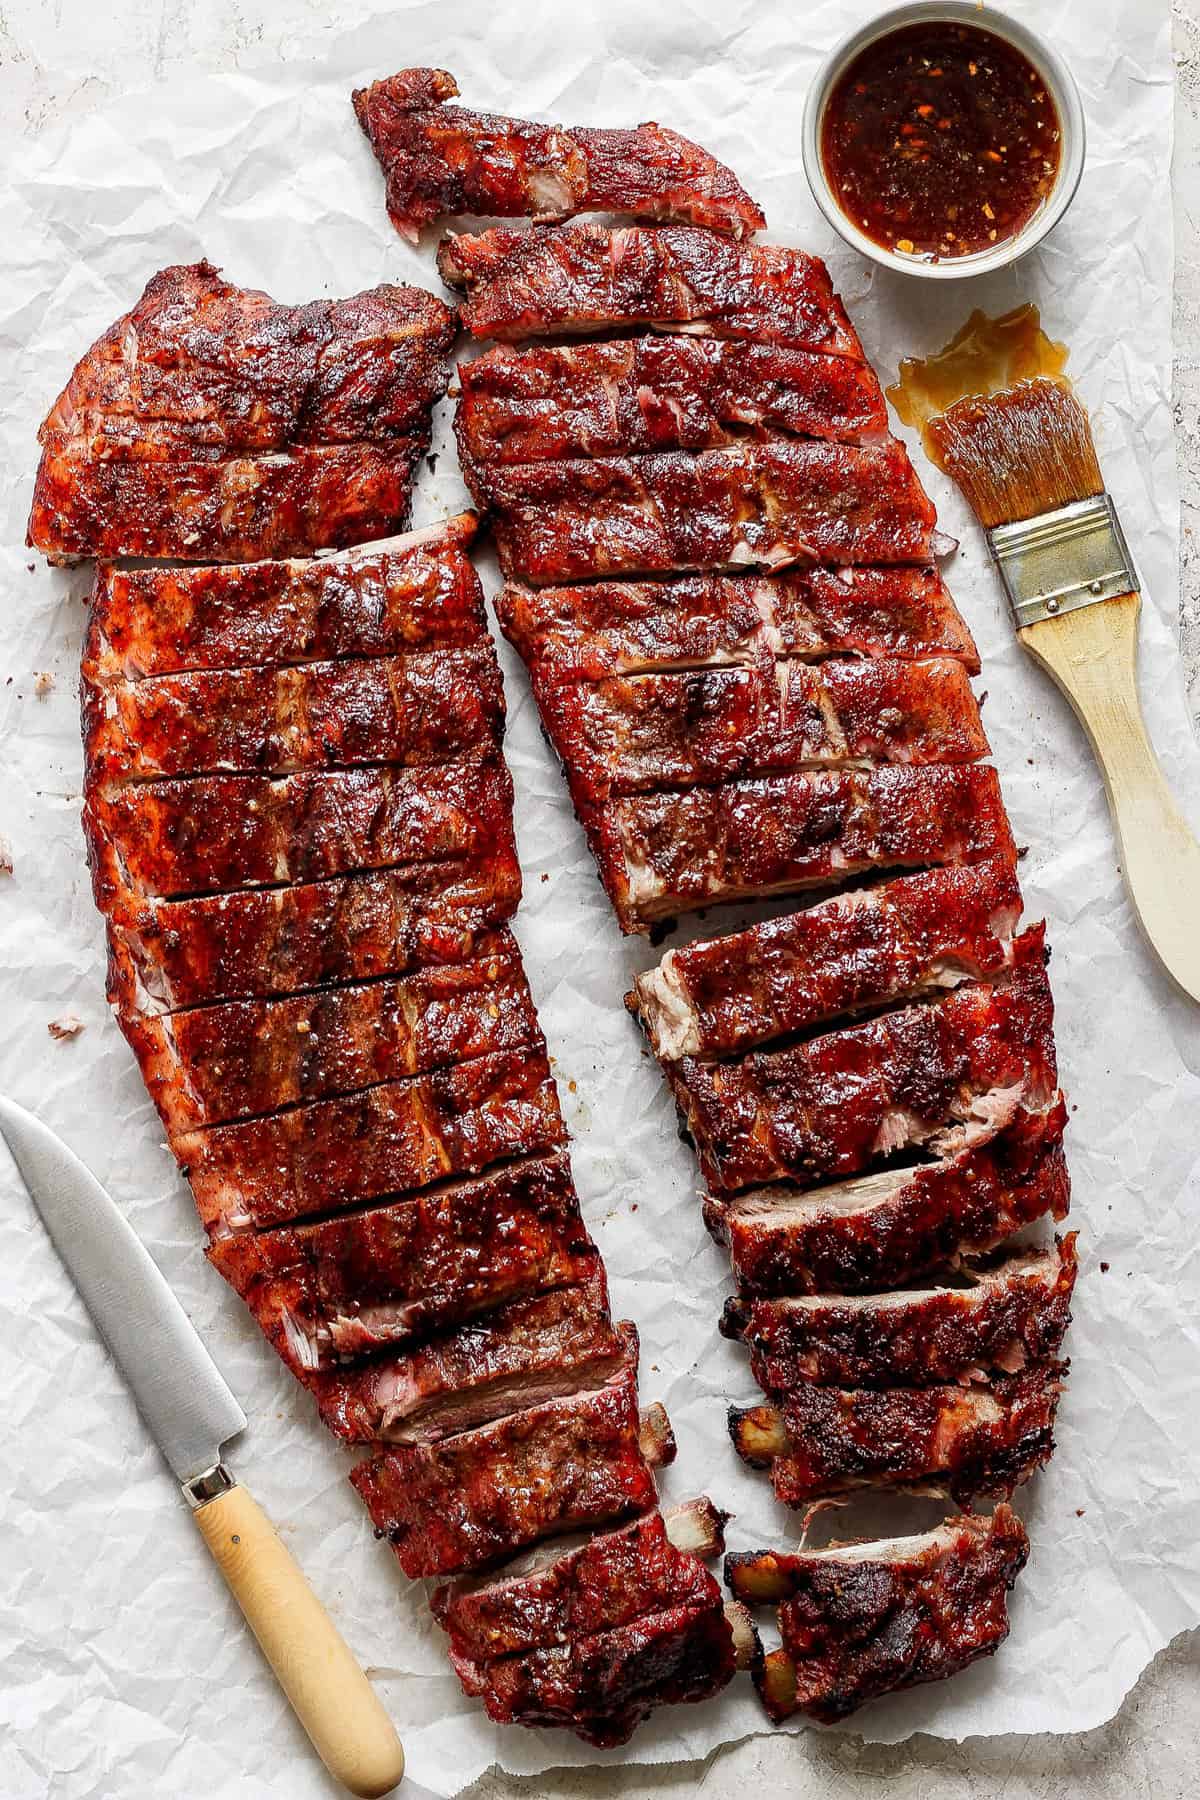 Two racks of barbecued ribs cut into portions, placed on parchment paper with a knife, a brush, and a bowl of sauce.